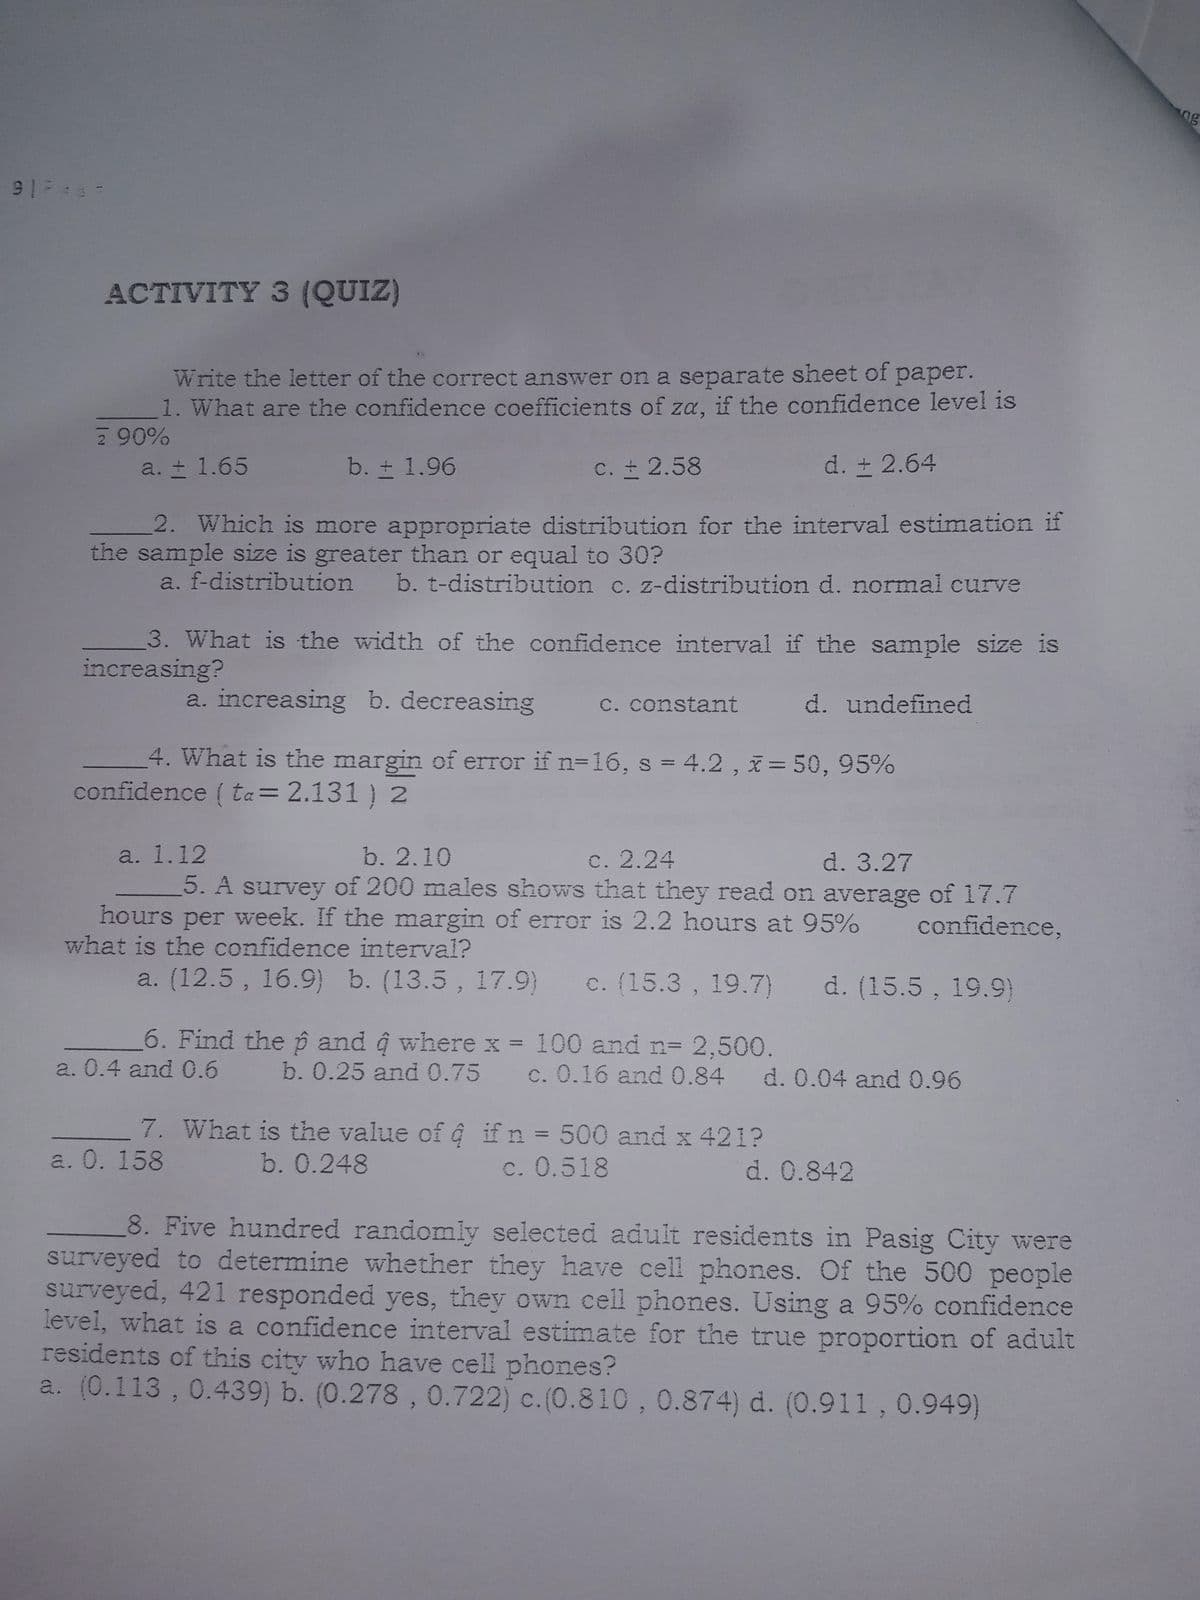 ng
ACTIVITY 3 (QUIZ)
Write the letter of the correct answer on a separate sheet of paper.
1. What are the confidence coefficients of za, if the confidence level is
2 90%
a. ± 1.65
b. ± 1.96
C. 2.58
d. + 2.64
2. Which is more appropriate distribution for the interval estimation if
the sample size is greater than or equal to 30?
a. f-distribution b. t-distribution c. z-distribution d. normal curve
3. What is the width of the confidence interval if the sample size is
increasing?
a. increasing b. decreasing
C. constant
d. undefined
4. What is the margin of error if n=16, s = 4.2 , x= 50, 95%
confidence ( ta= 2.131 ) 2
a. 1.12
5. A survey of 200 males shows that they read on average of 17.7
b. 2.10
c. 2.24
d. 3.27
hours per week. If the margin of error is 2.2 hours at 95%
what is the confidence interval?
confidence,
a. (12.5, 16.9) b. (13.5, 17.9)
c. (15.3 , 19.7)
d. (15.5, 19.9)
6. Find the p and ĝ wherex = 100 and n= 2,500.
a. 0.4 and 0.6
b. 0.25 and 0.75 c. 0.16 and 0.84 d. 0.04 and 0.96
7. What is the value of ĝ if n = 500 and x 421?
a. 0. 158
%3D
b. 0.248
c. 0.518
d. 0.842
8. Five hundred randomly selected adult residents in Pasig City were
surveyed to determine whether they have cell phones. Of the 500 people
surveyed, 421 responded yes, they own cell phones. Using a 95% confidence
level, what is a confidence interval estimate for the true proportion of adult
residents of this city who have cell phones?
a. (0.113 , 0.439) b. (0.278 , 0.722) c.(0.810,0.874) d. (0.911, 0.949)
